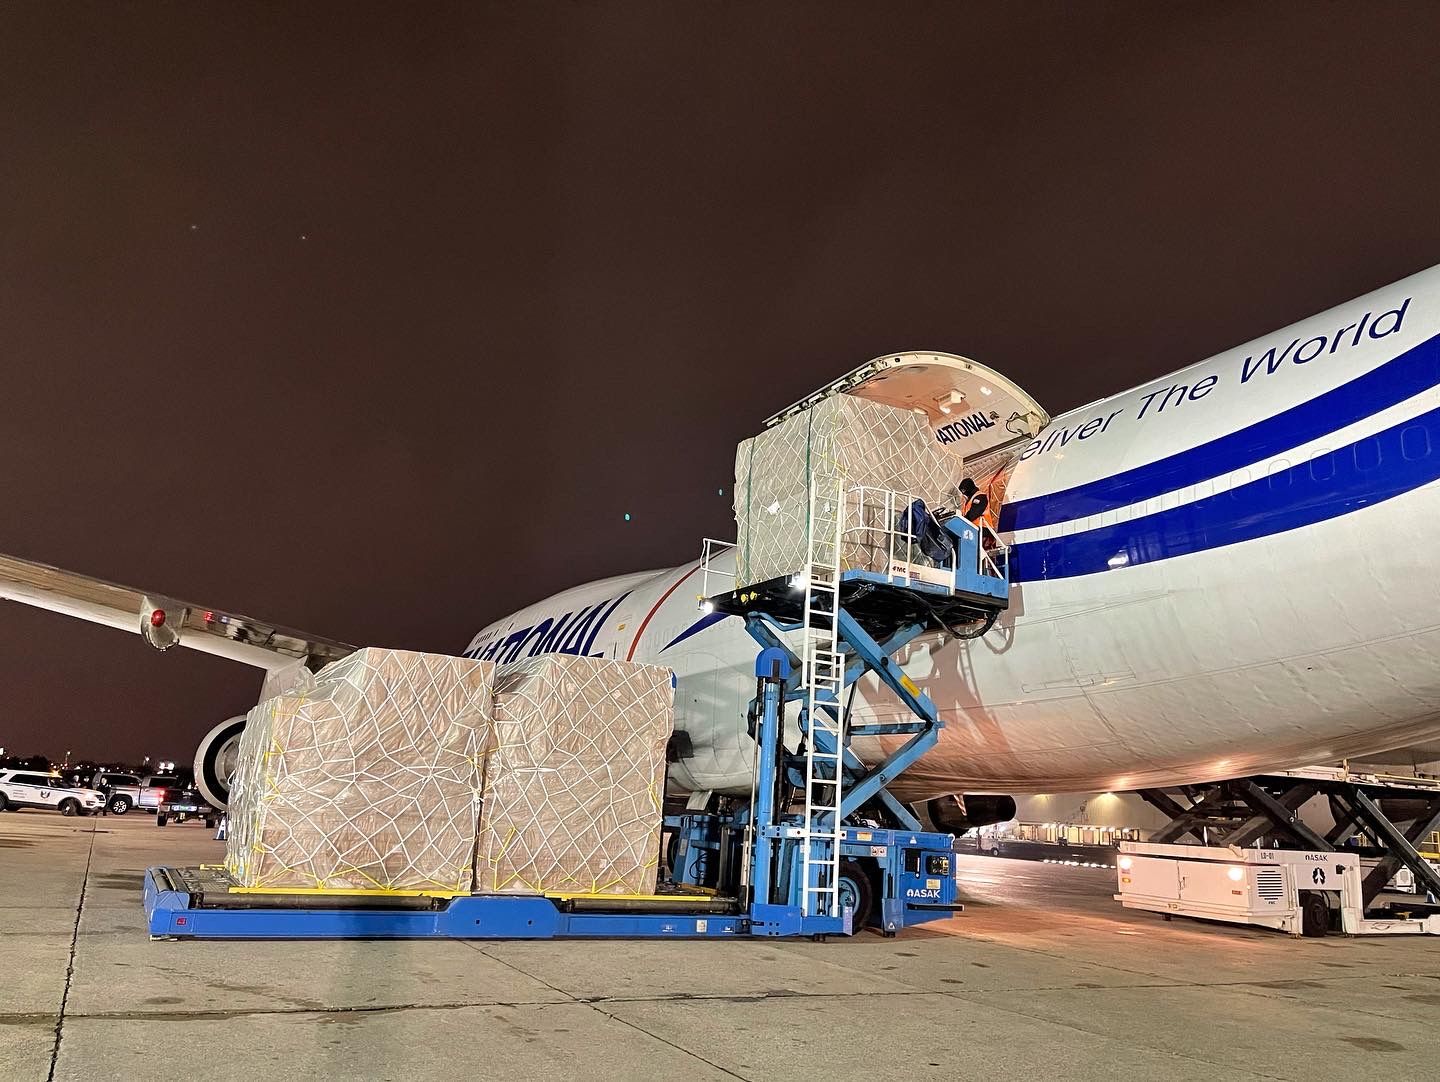 cargo being loaded into a national plane